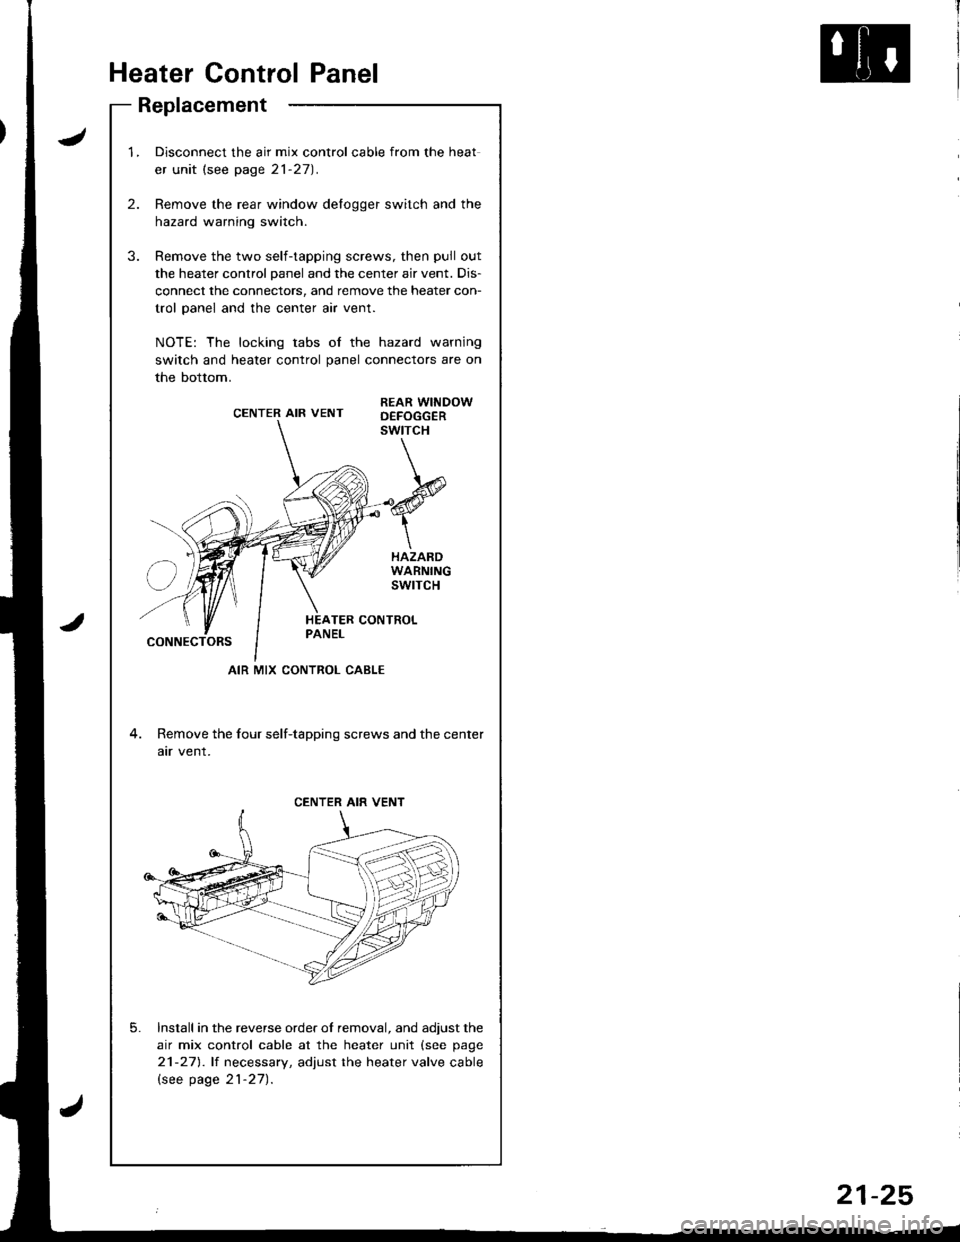 HONDA INTEGRA 1998 4.G Workshop Manual Heater Control Panel
Replacement
J
2.
1.Disconnect the air mix control cable from the heat
er unit (see page 21-27).
Remove the rear window delogger switch and the
hazard warning switch.
Remove the tw